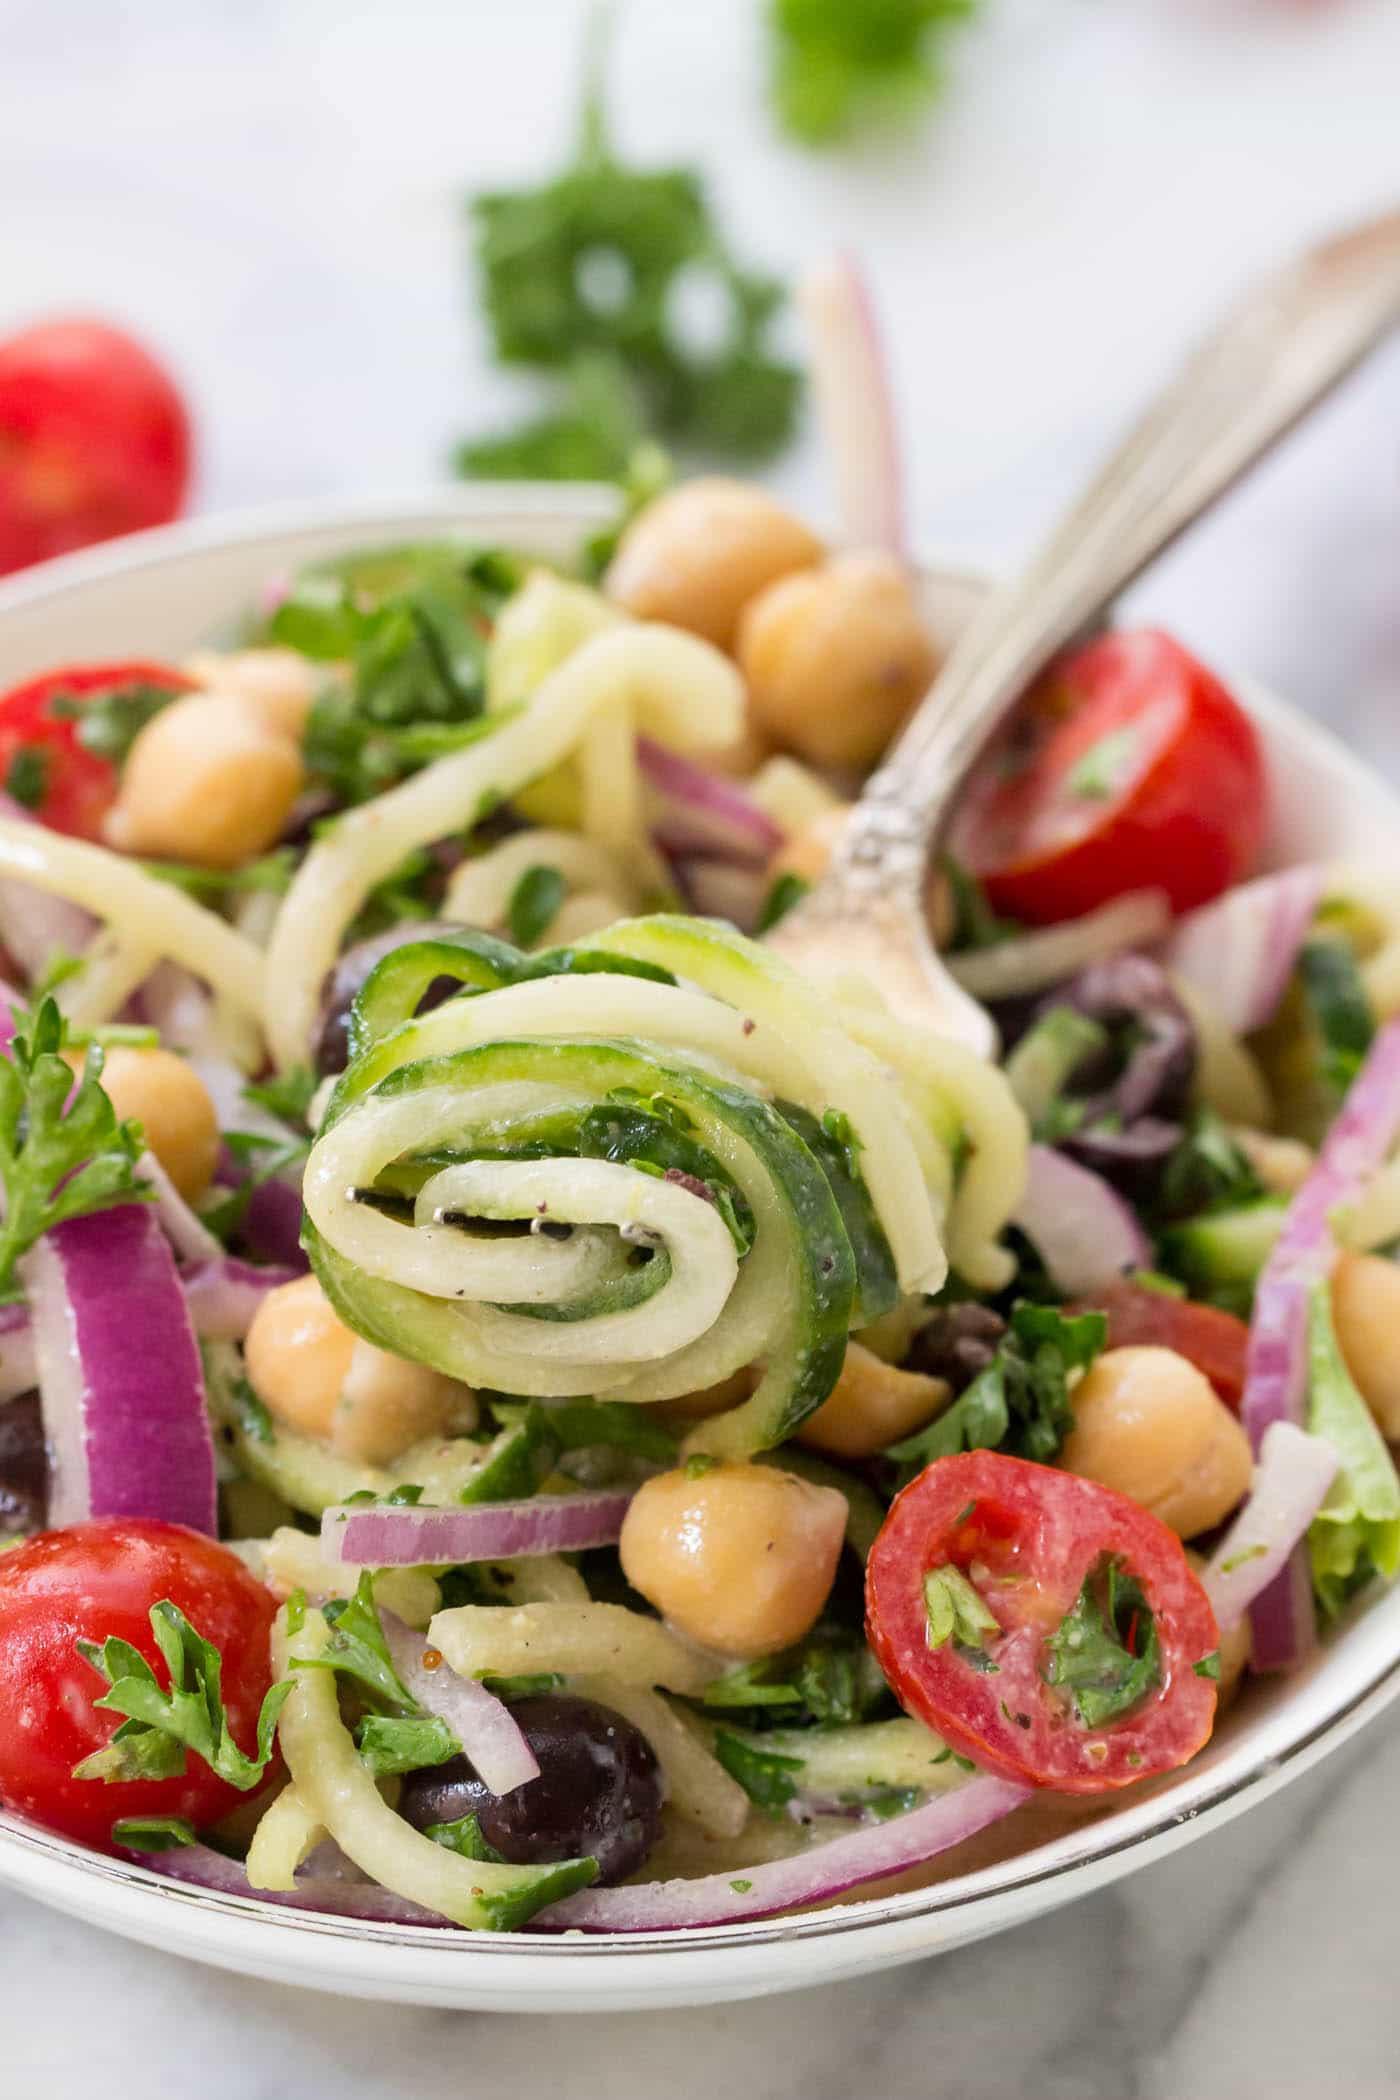 VEGAN GREEK SALAD with cucumber noodles + chickpeas! Light, simple, refreshing and HEALTHY!